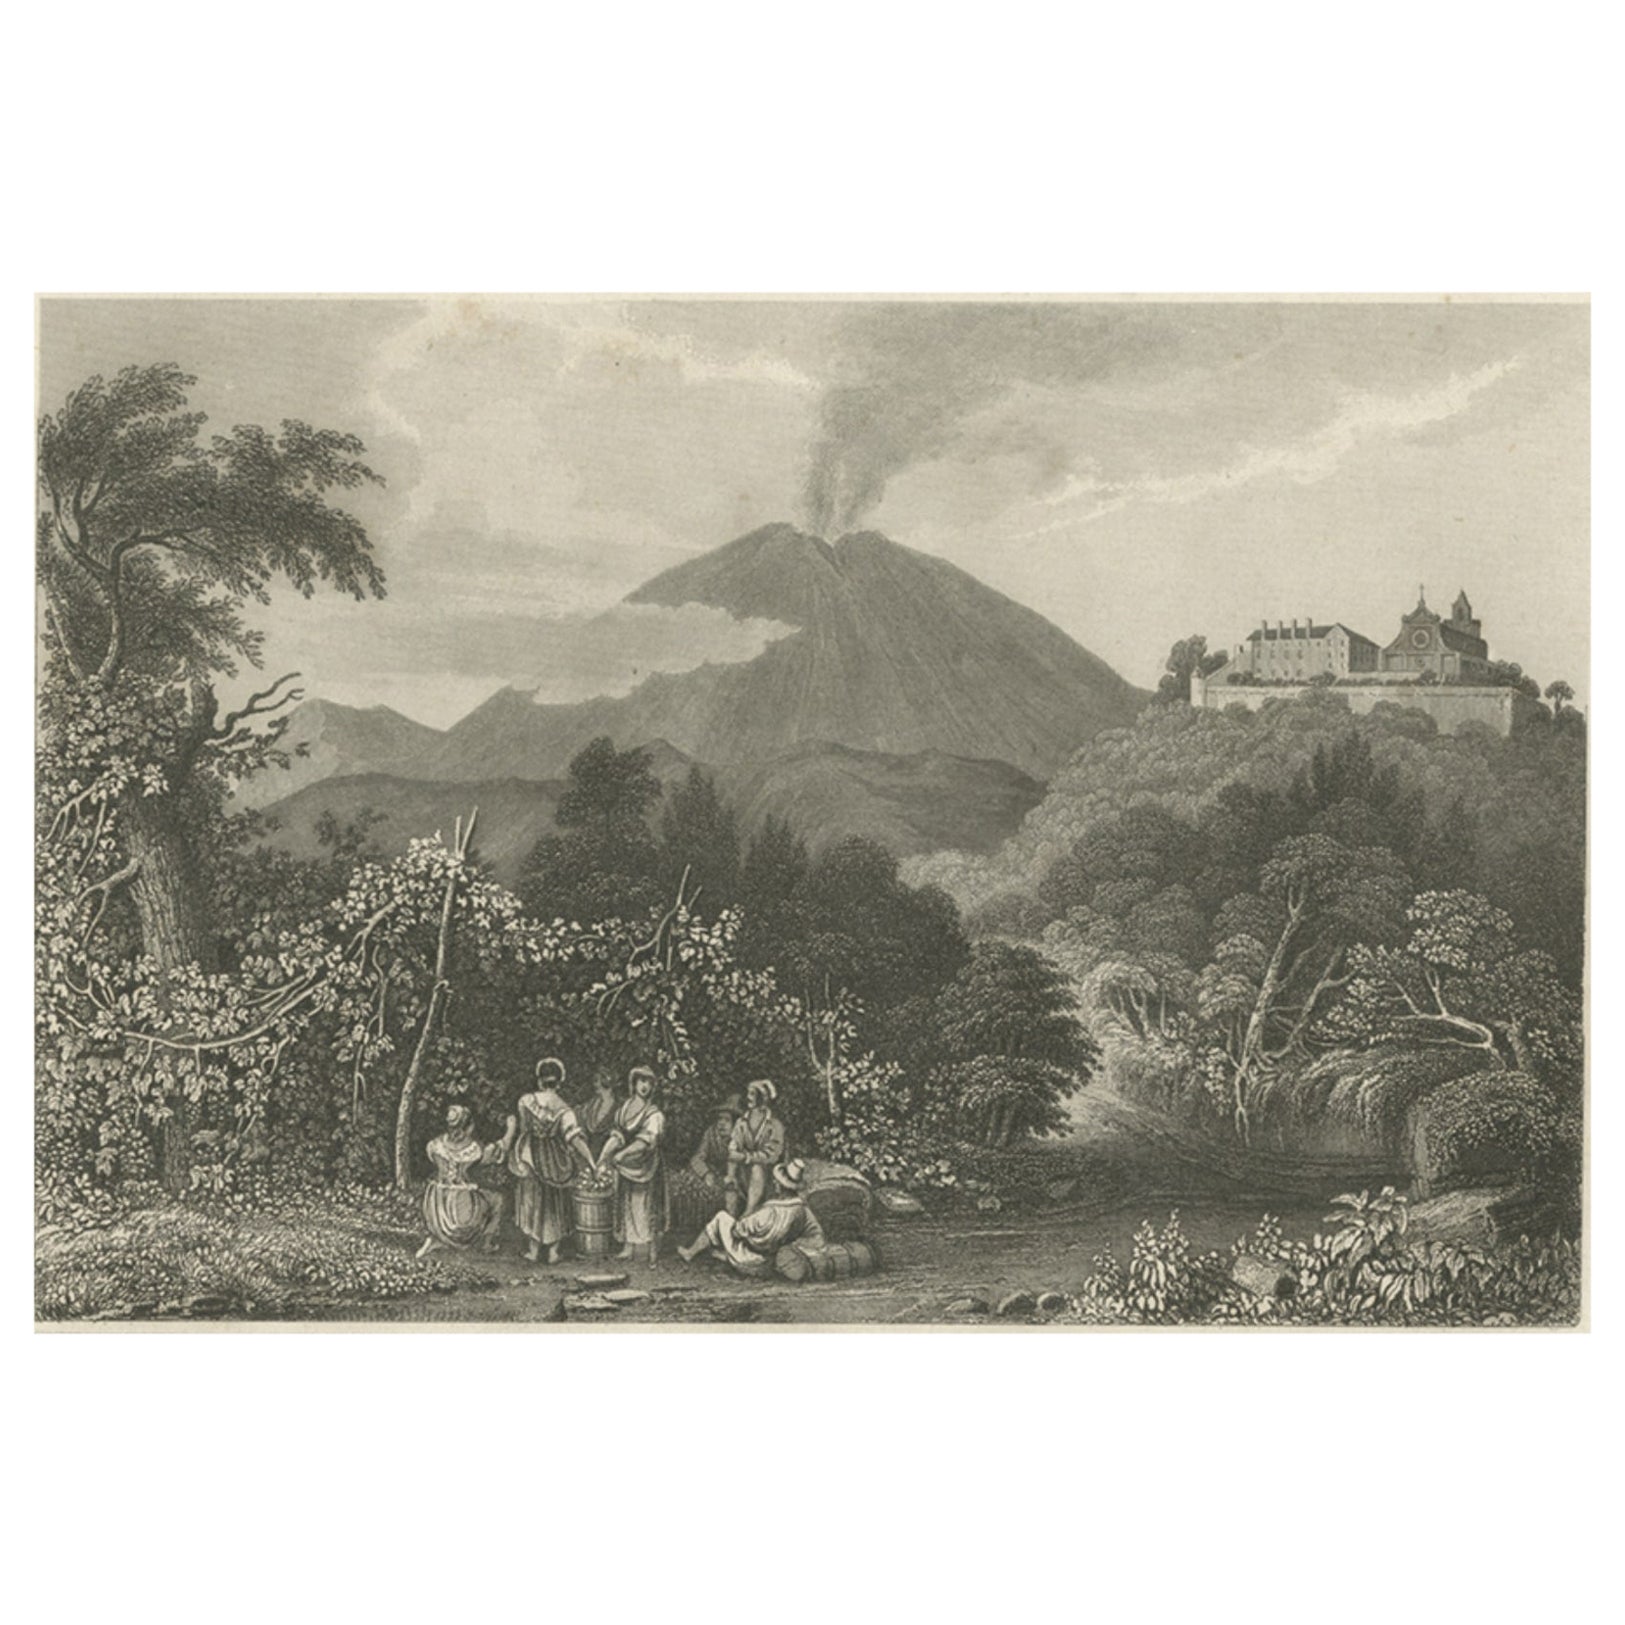 Antique Print of Monastery St Angelo Near Naples in Italy, 1837